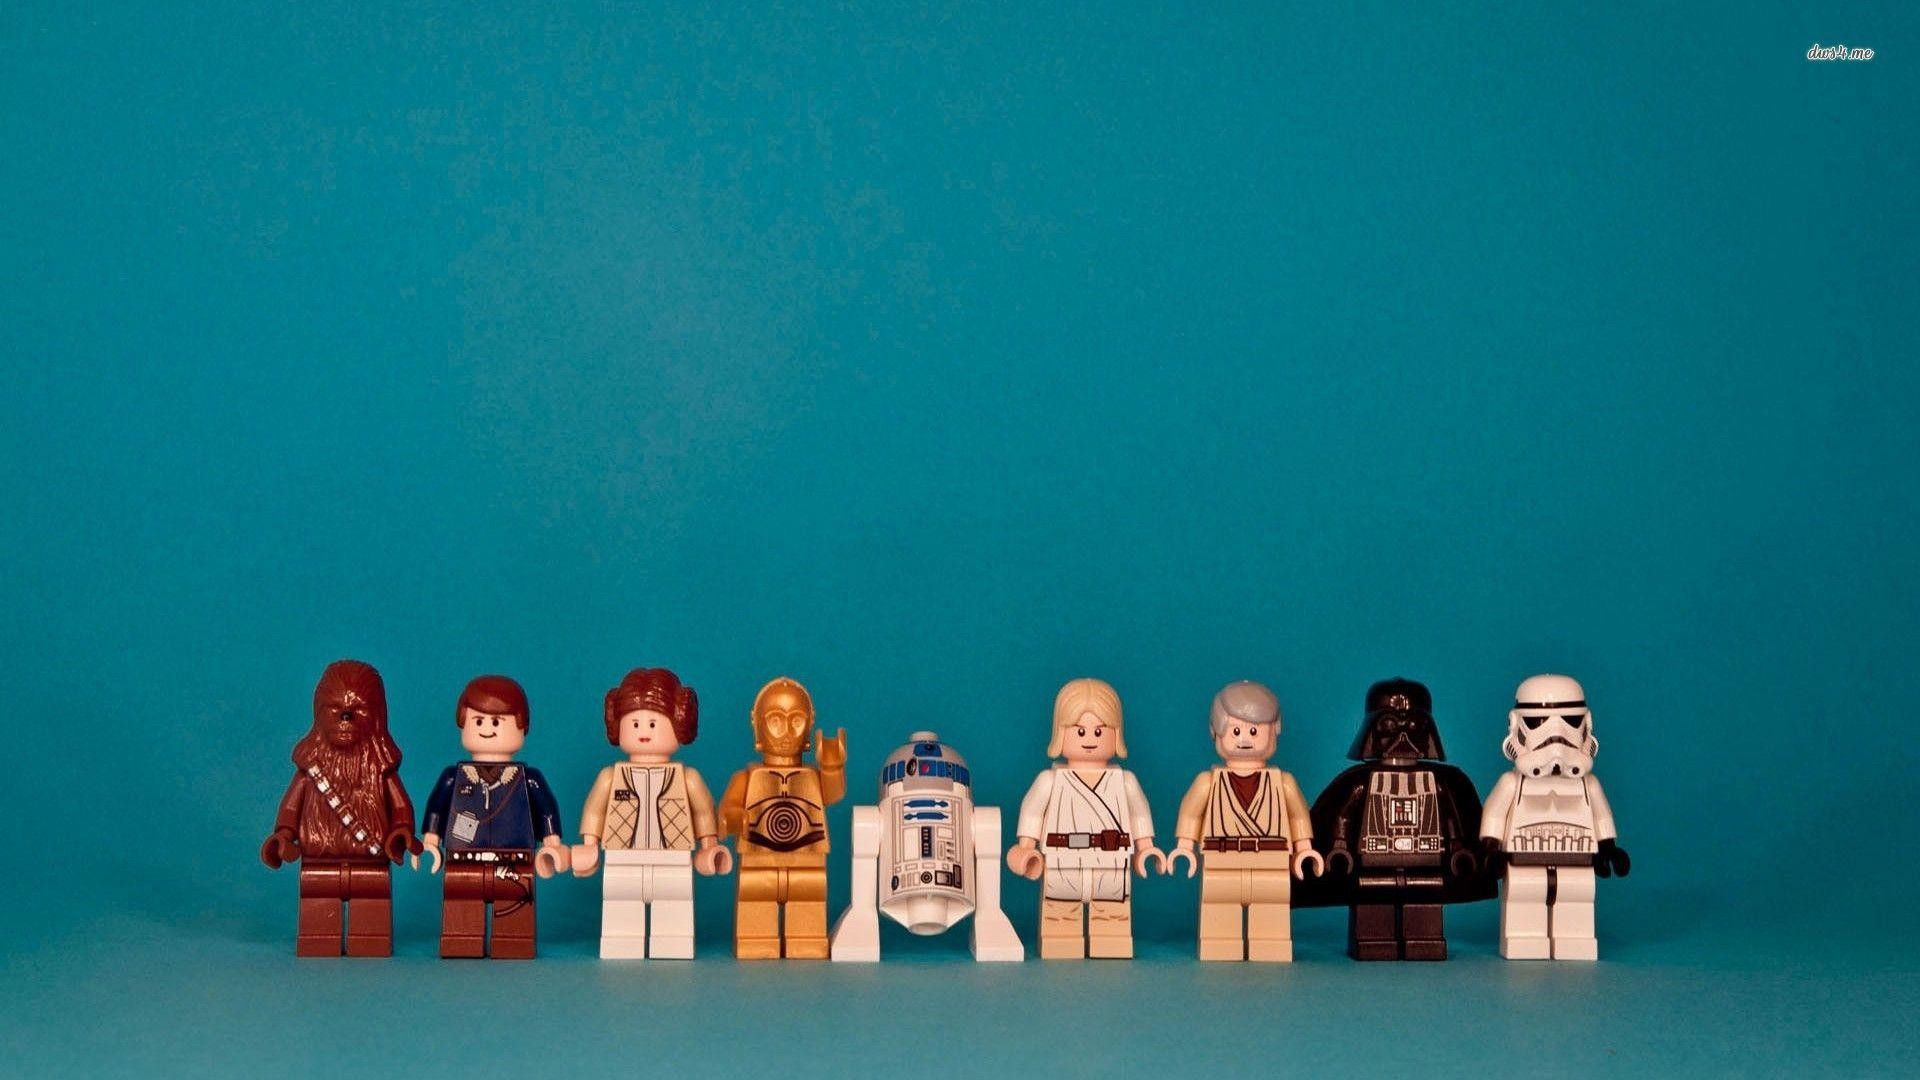 1920x1080 Star Wars Characters Lego Background HD Wallpaper of Lego .